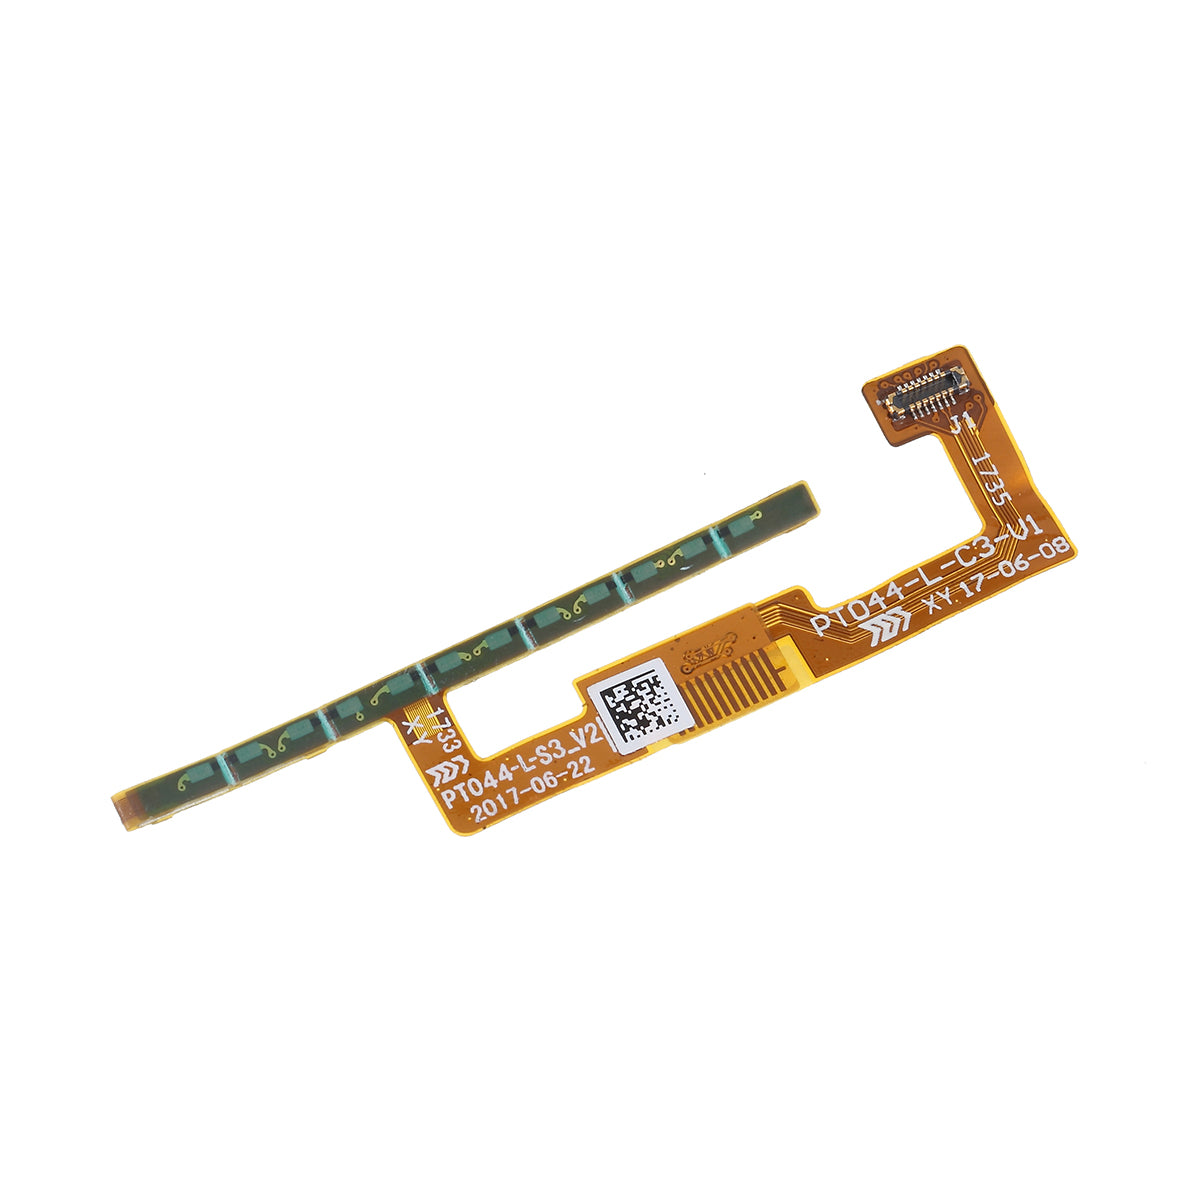 Charging Port Flex Cable Replacement for Google Pixel 2 XL